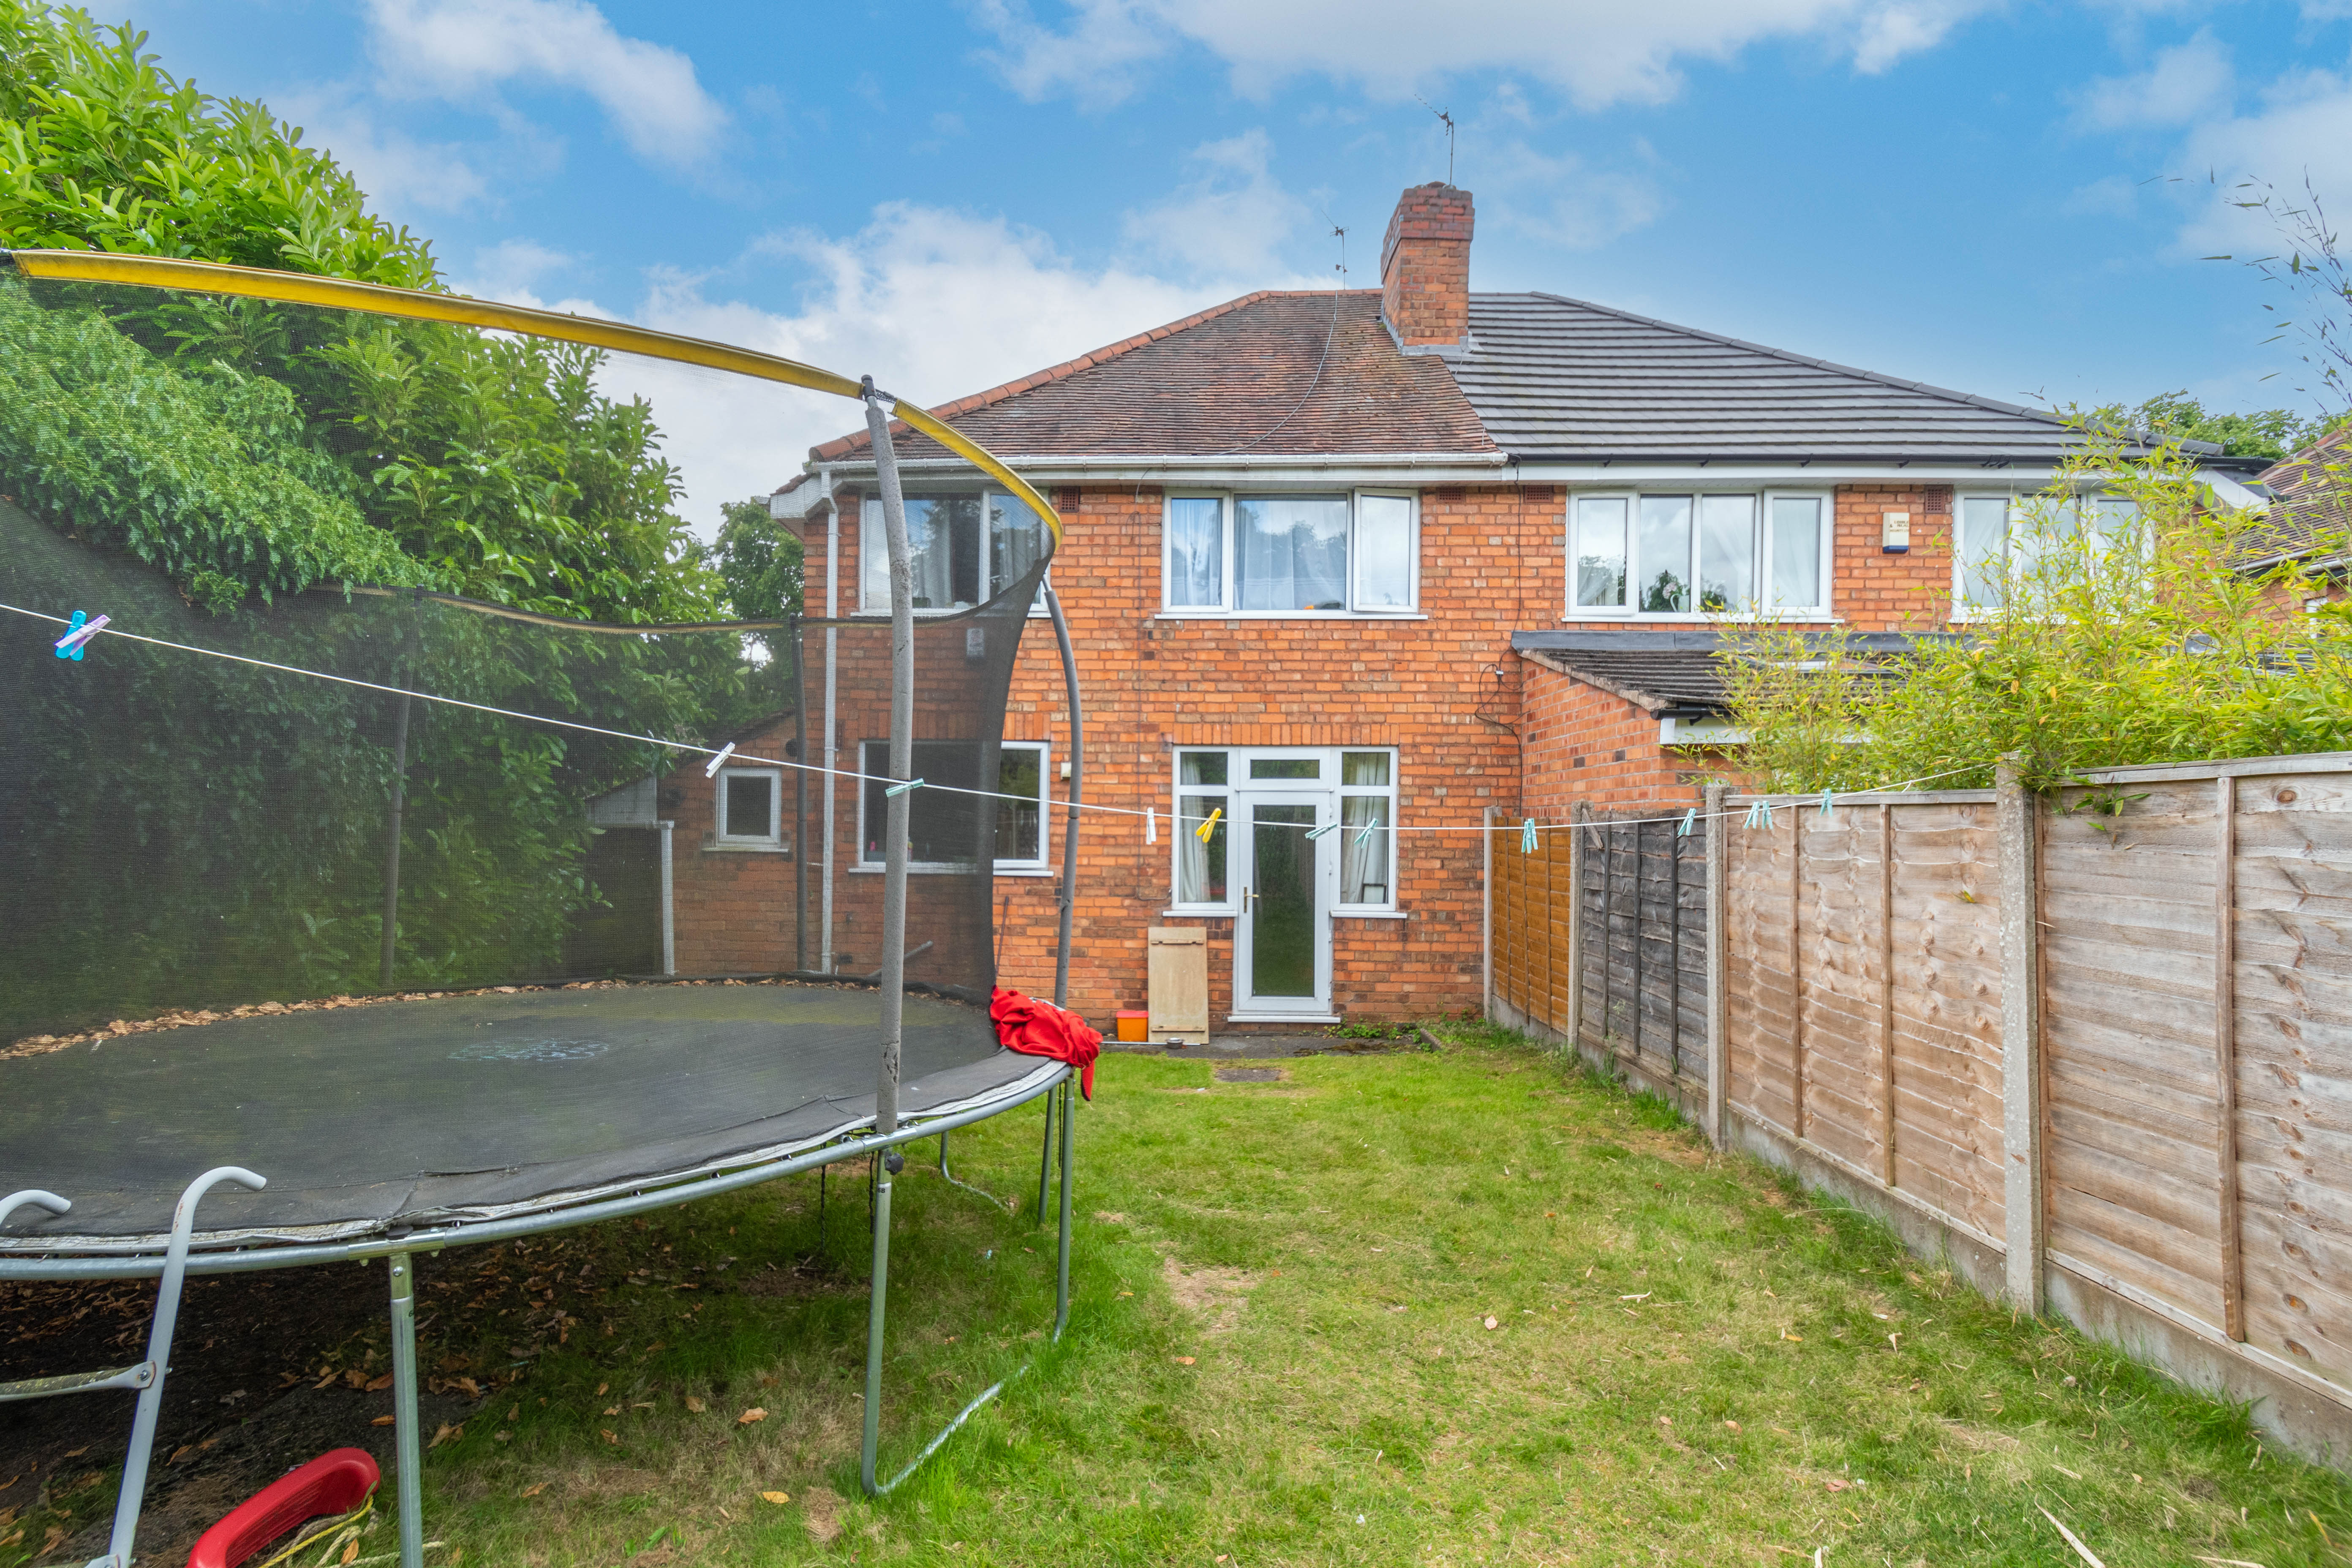 3 bed house for sale in Wilmington Road, Quinton 3